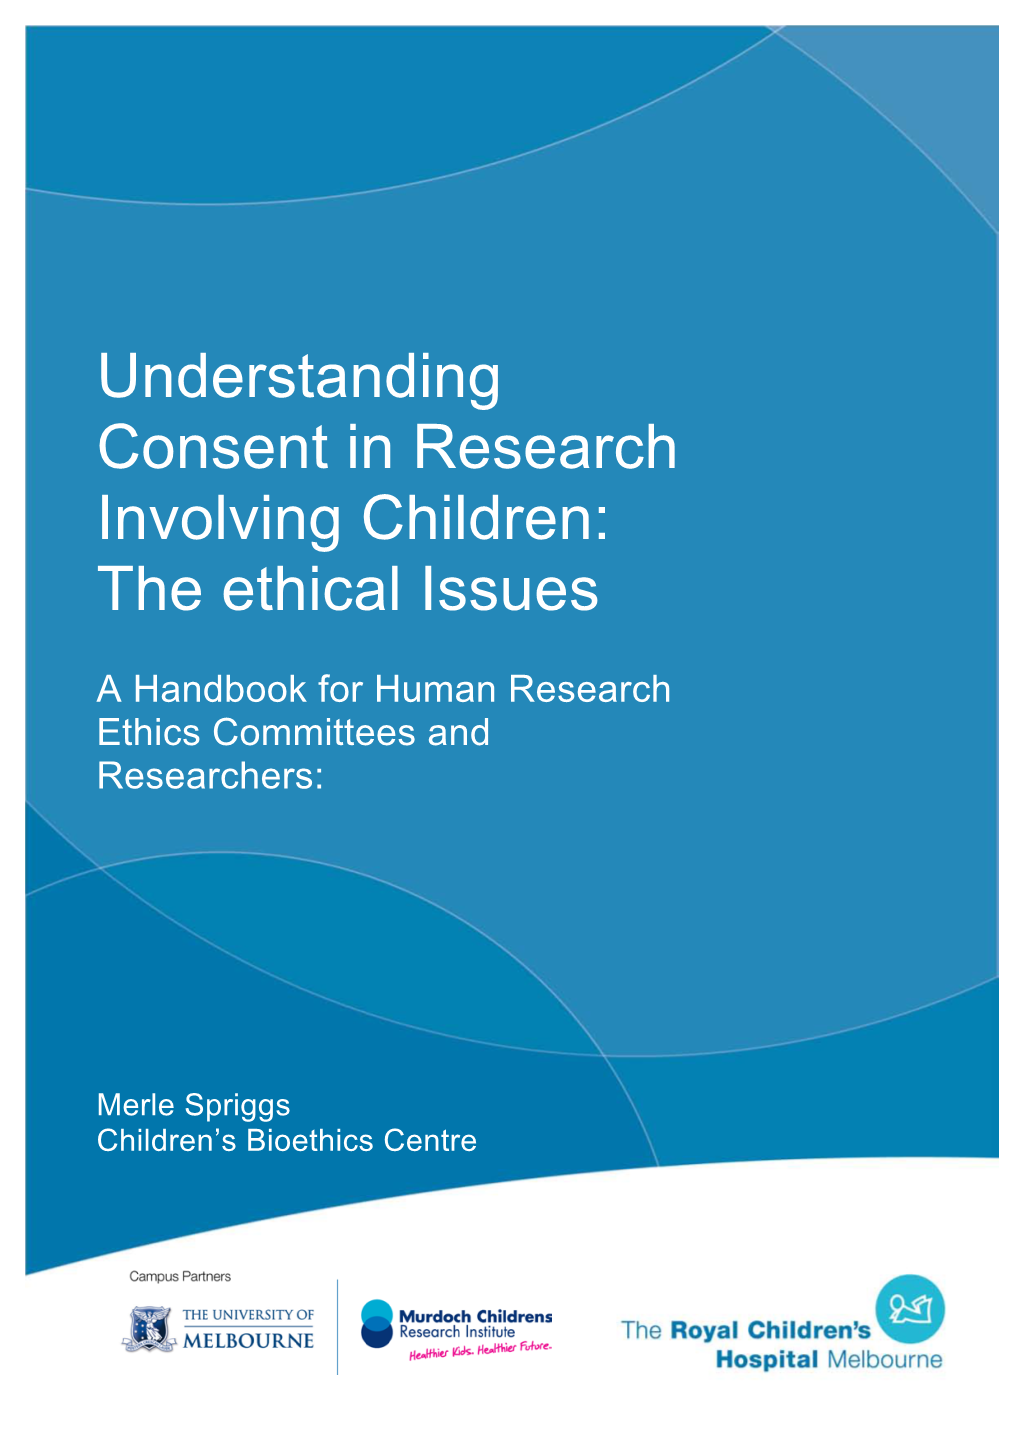 Understanding Consent in Research Involving Children: the Ethical Issues